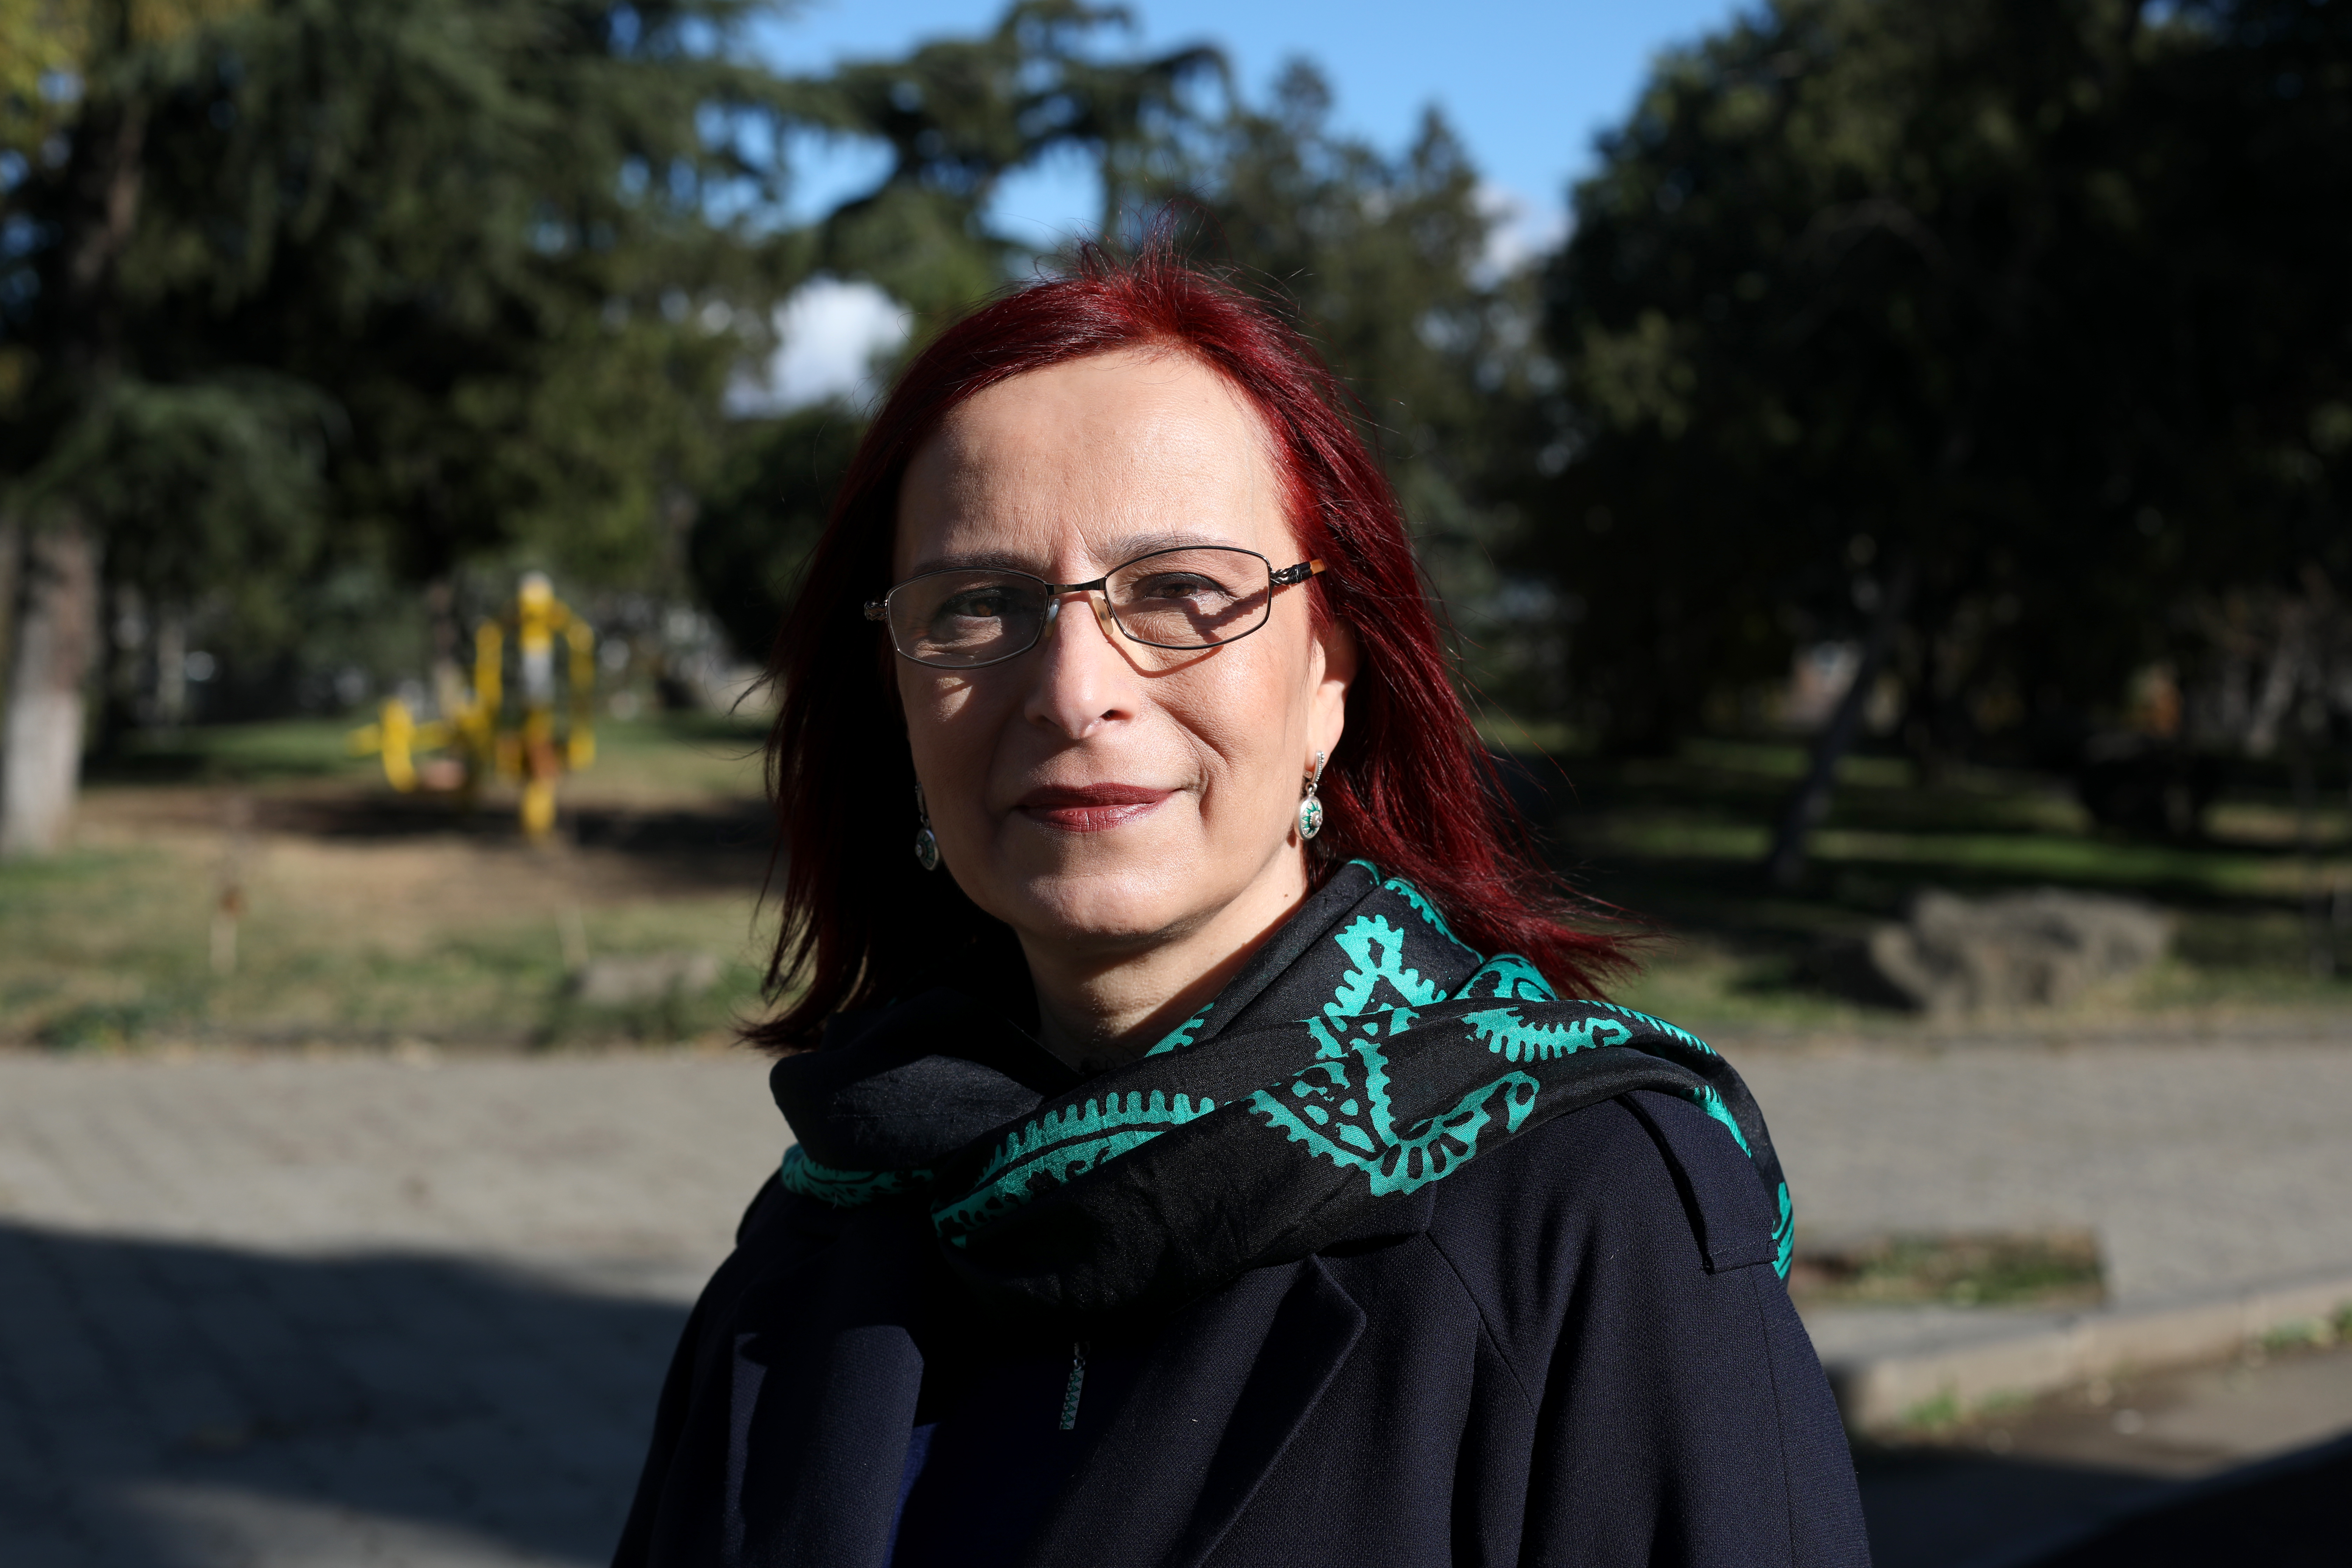 A woman with red hair and glasses standing outdoors